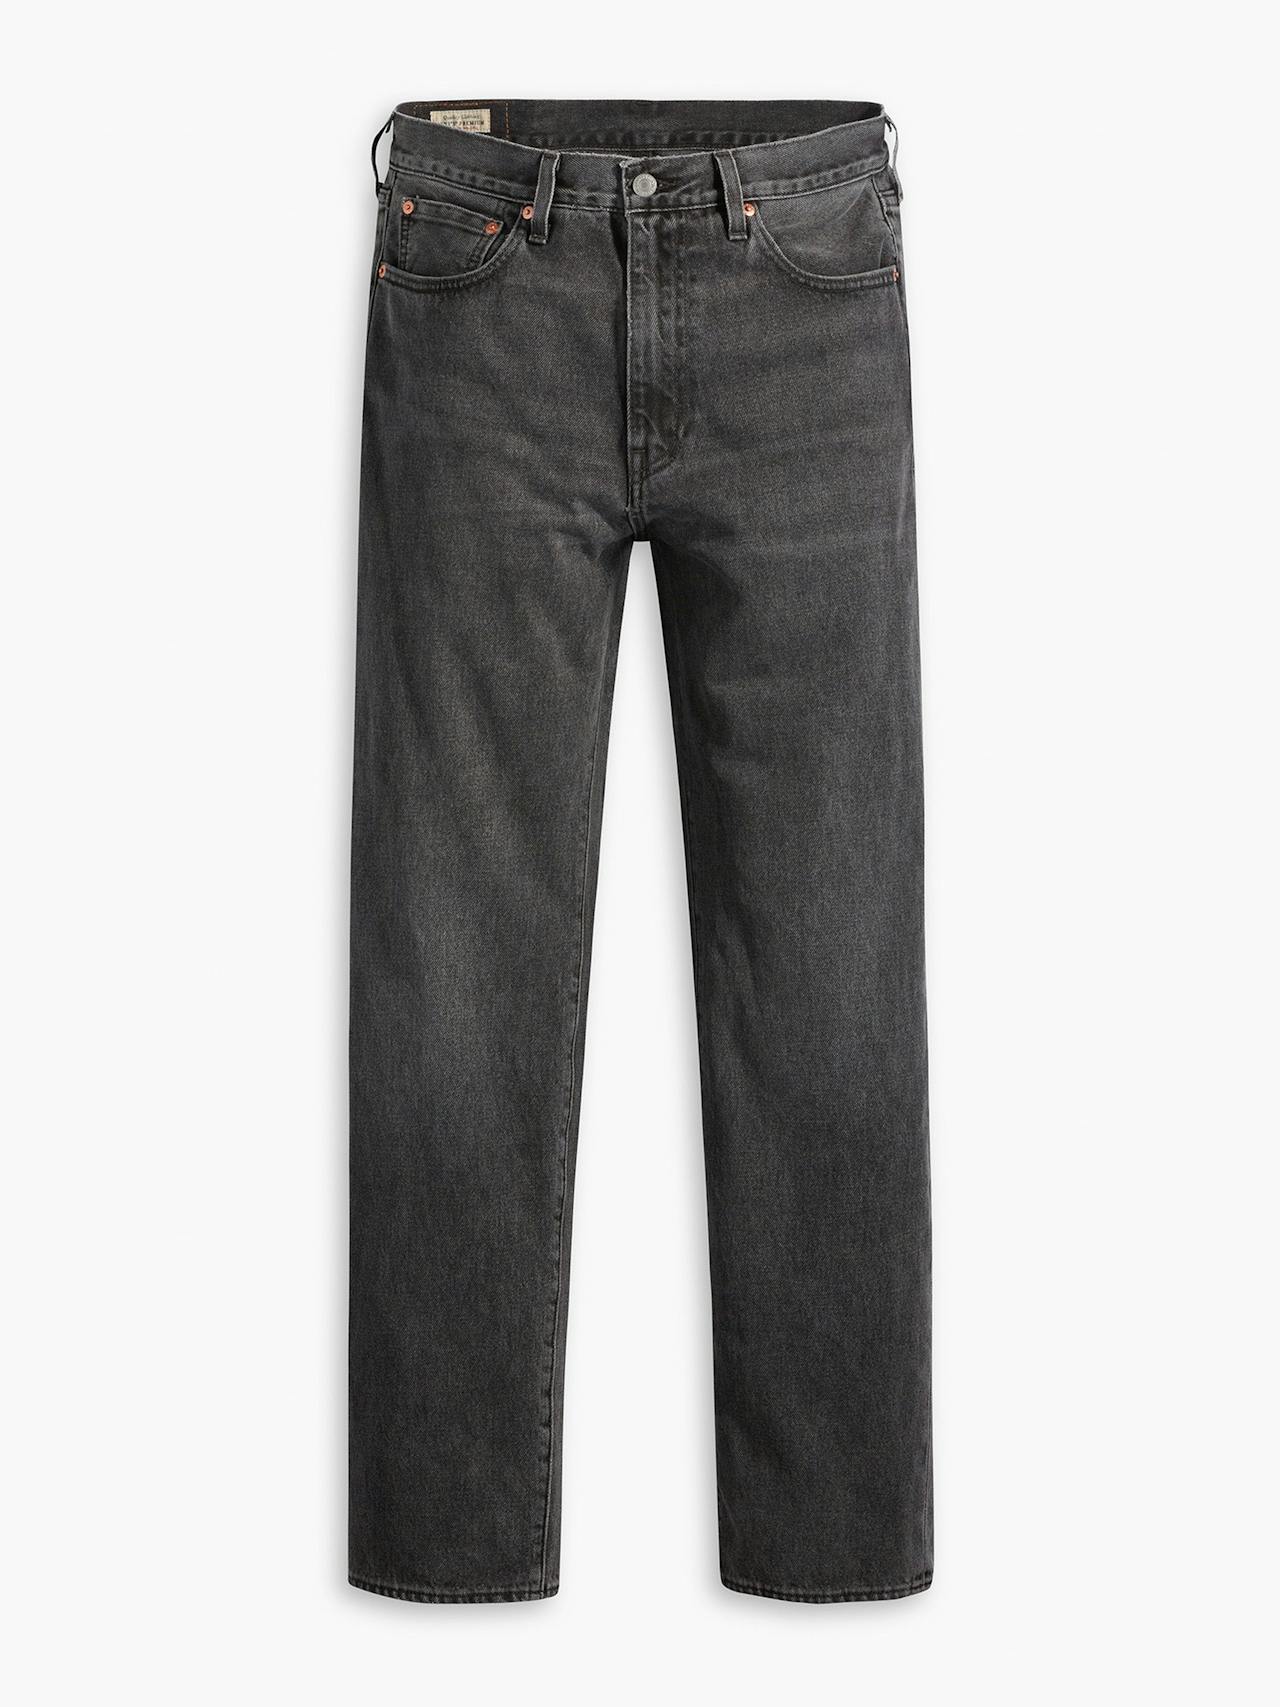 Mens 568™ stay loose jeans